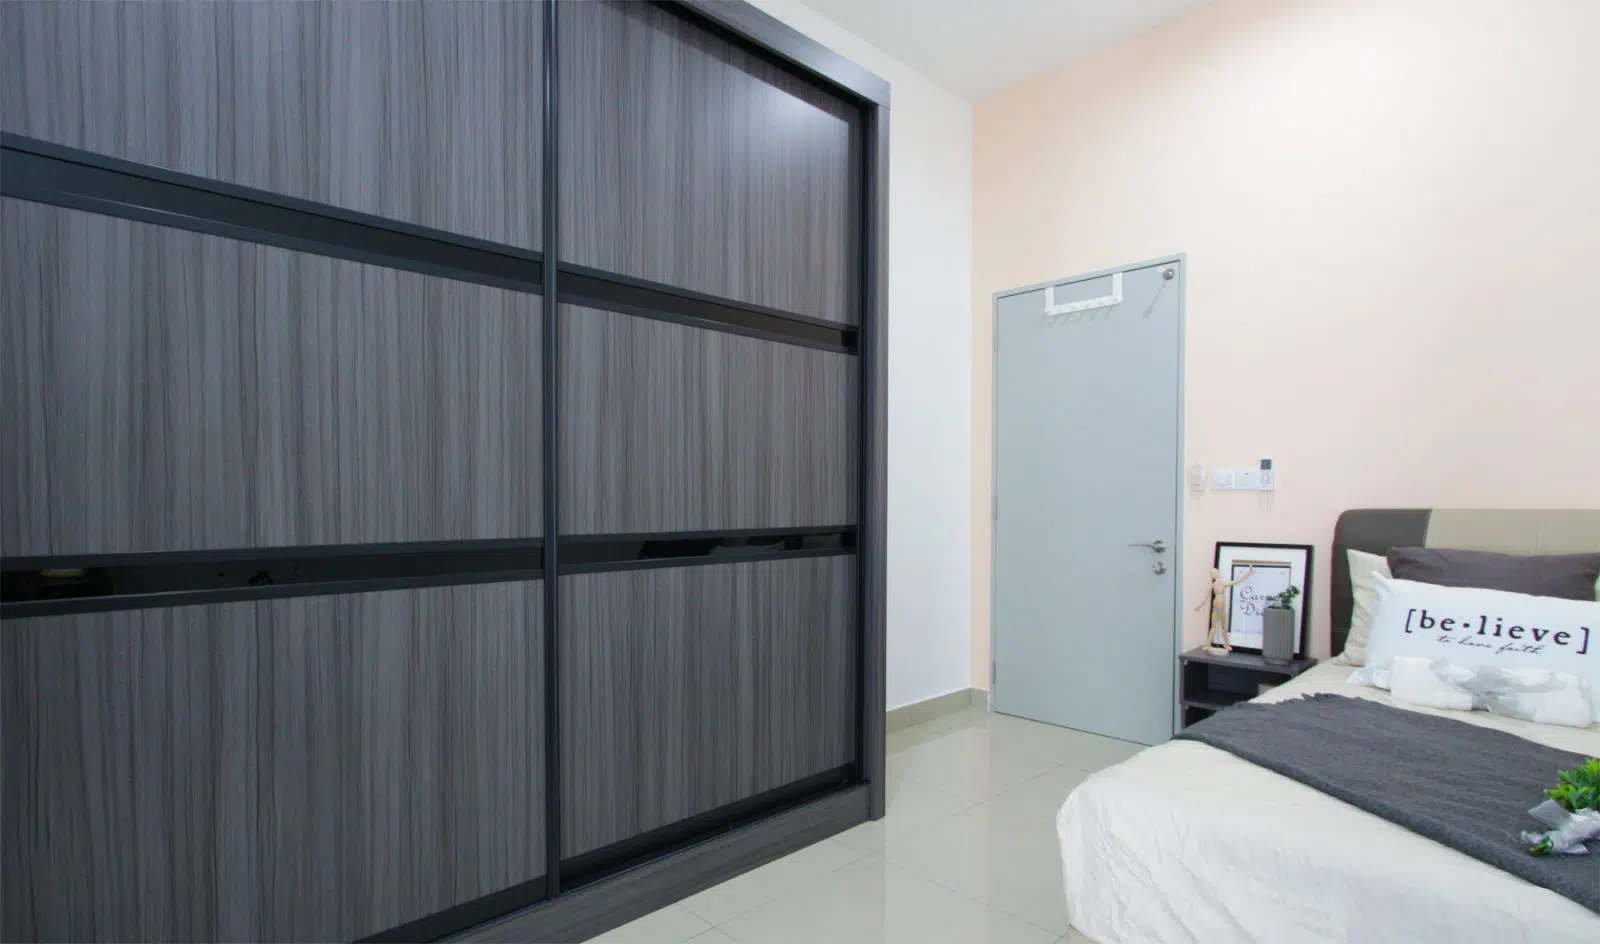 wardrobe design in of the bedrooms of this house in southville city